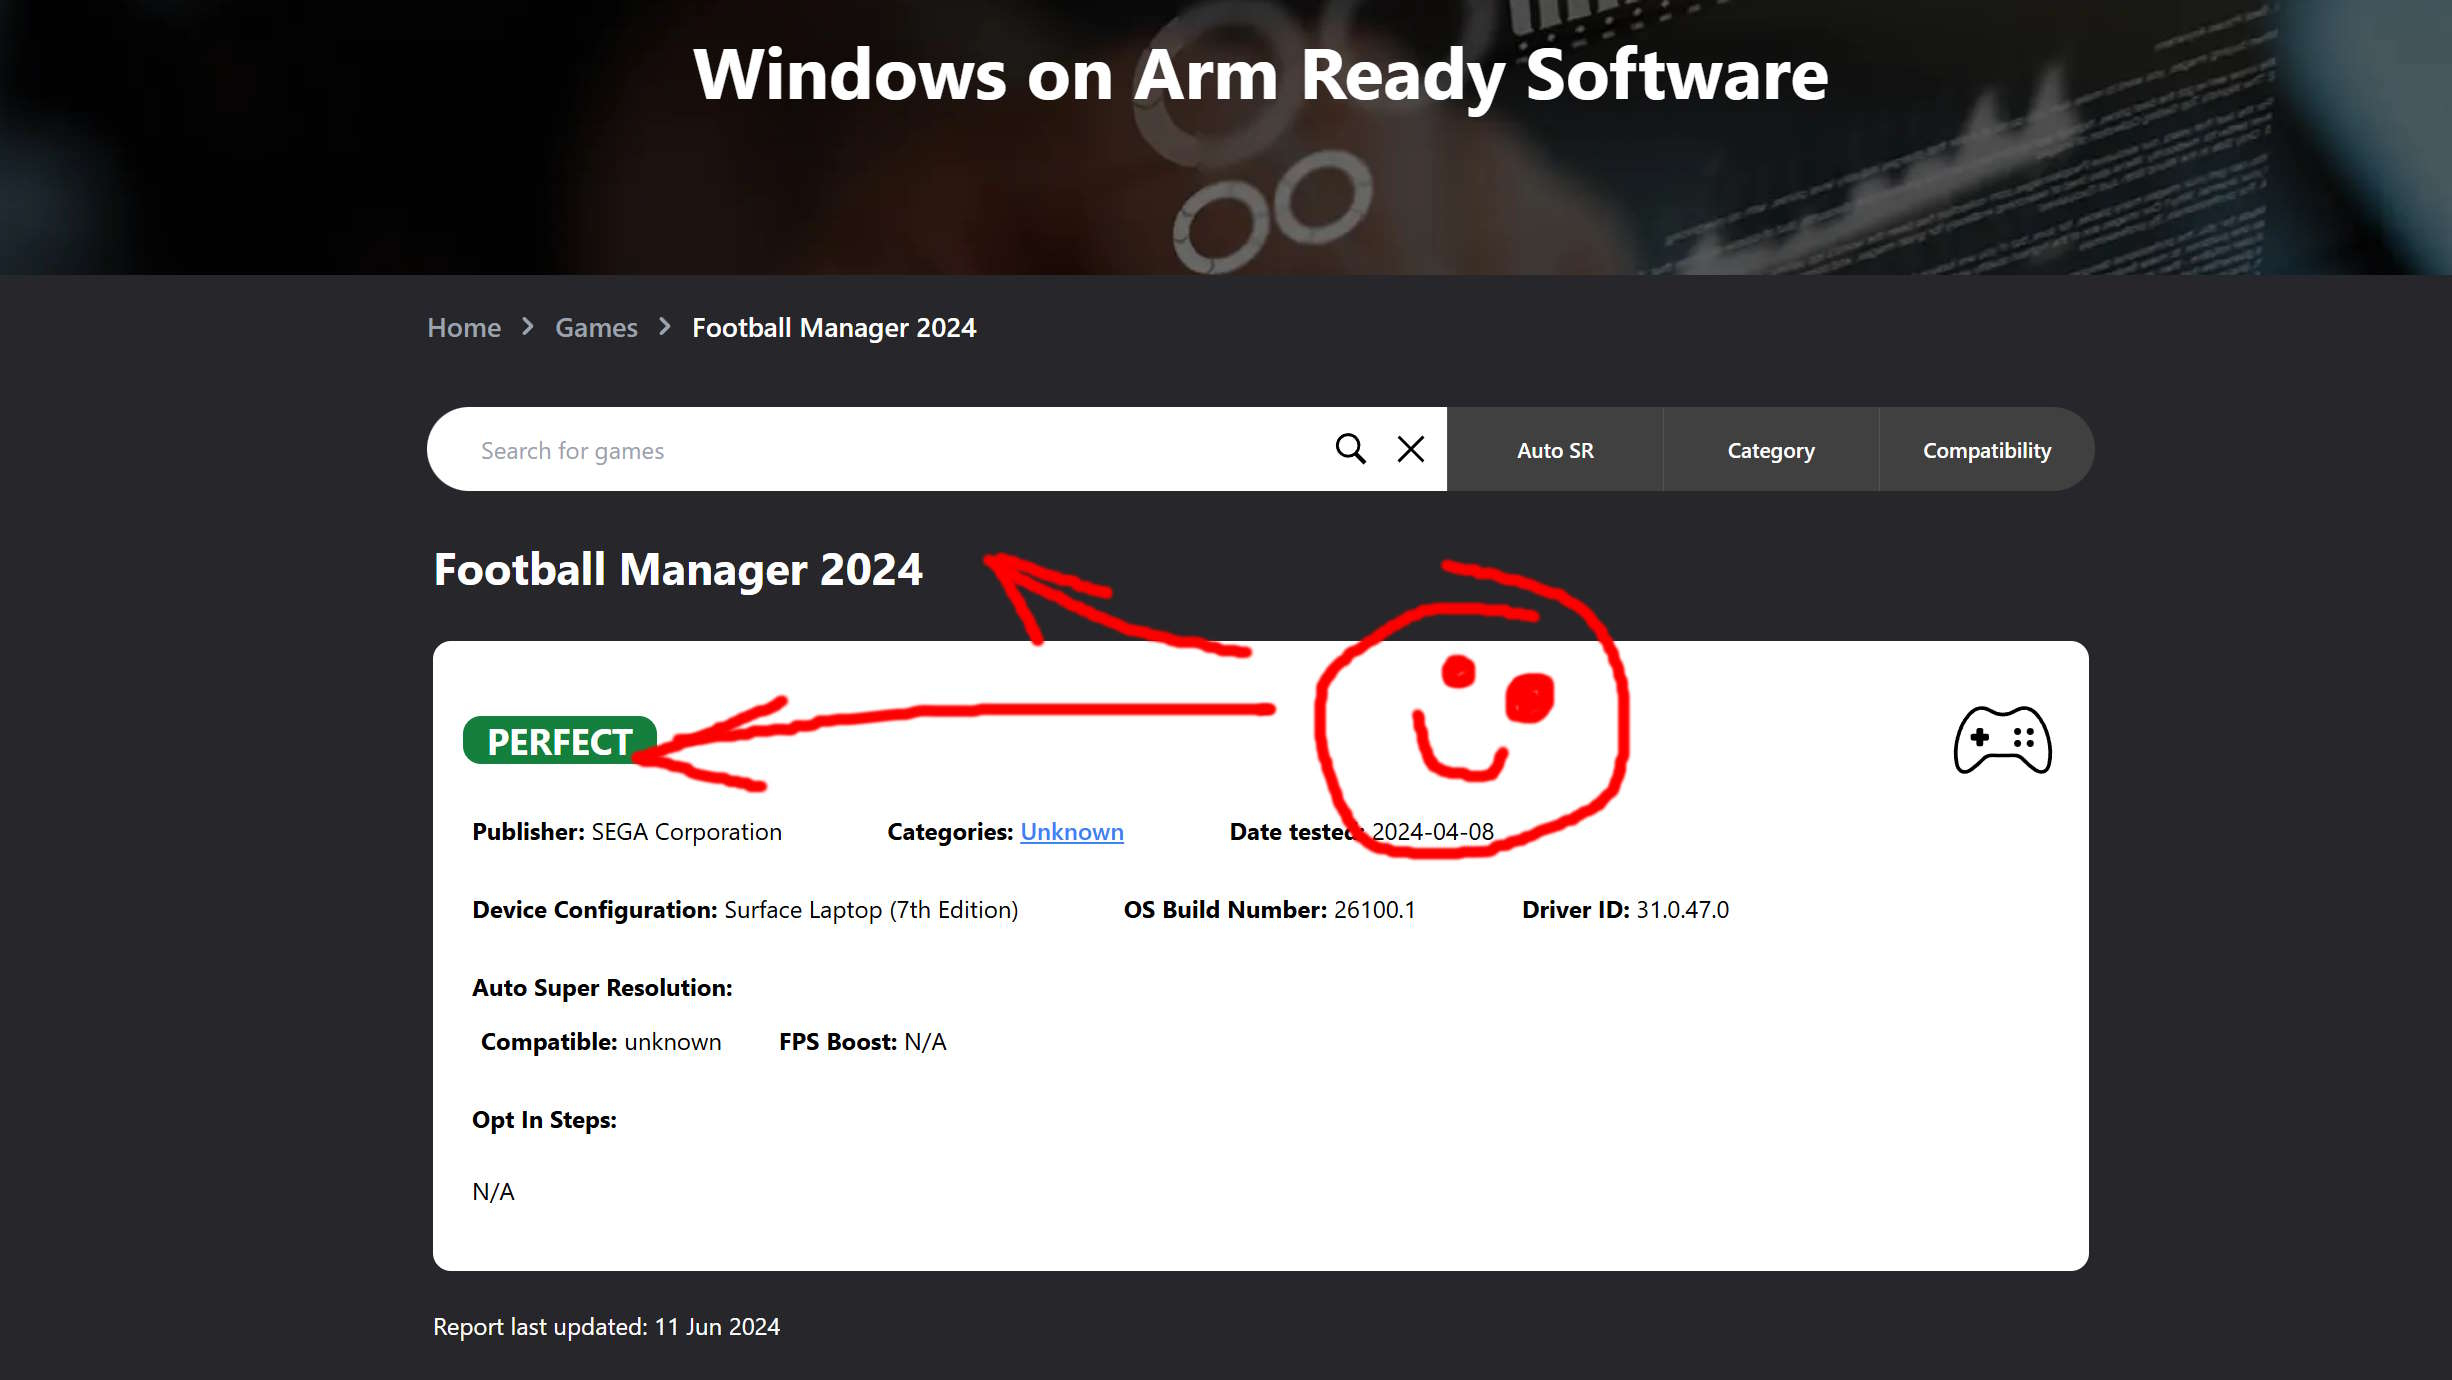 Football Manager 2024 listing on the Works on Windows on Arm site